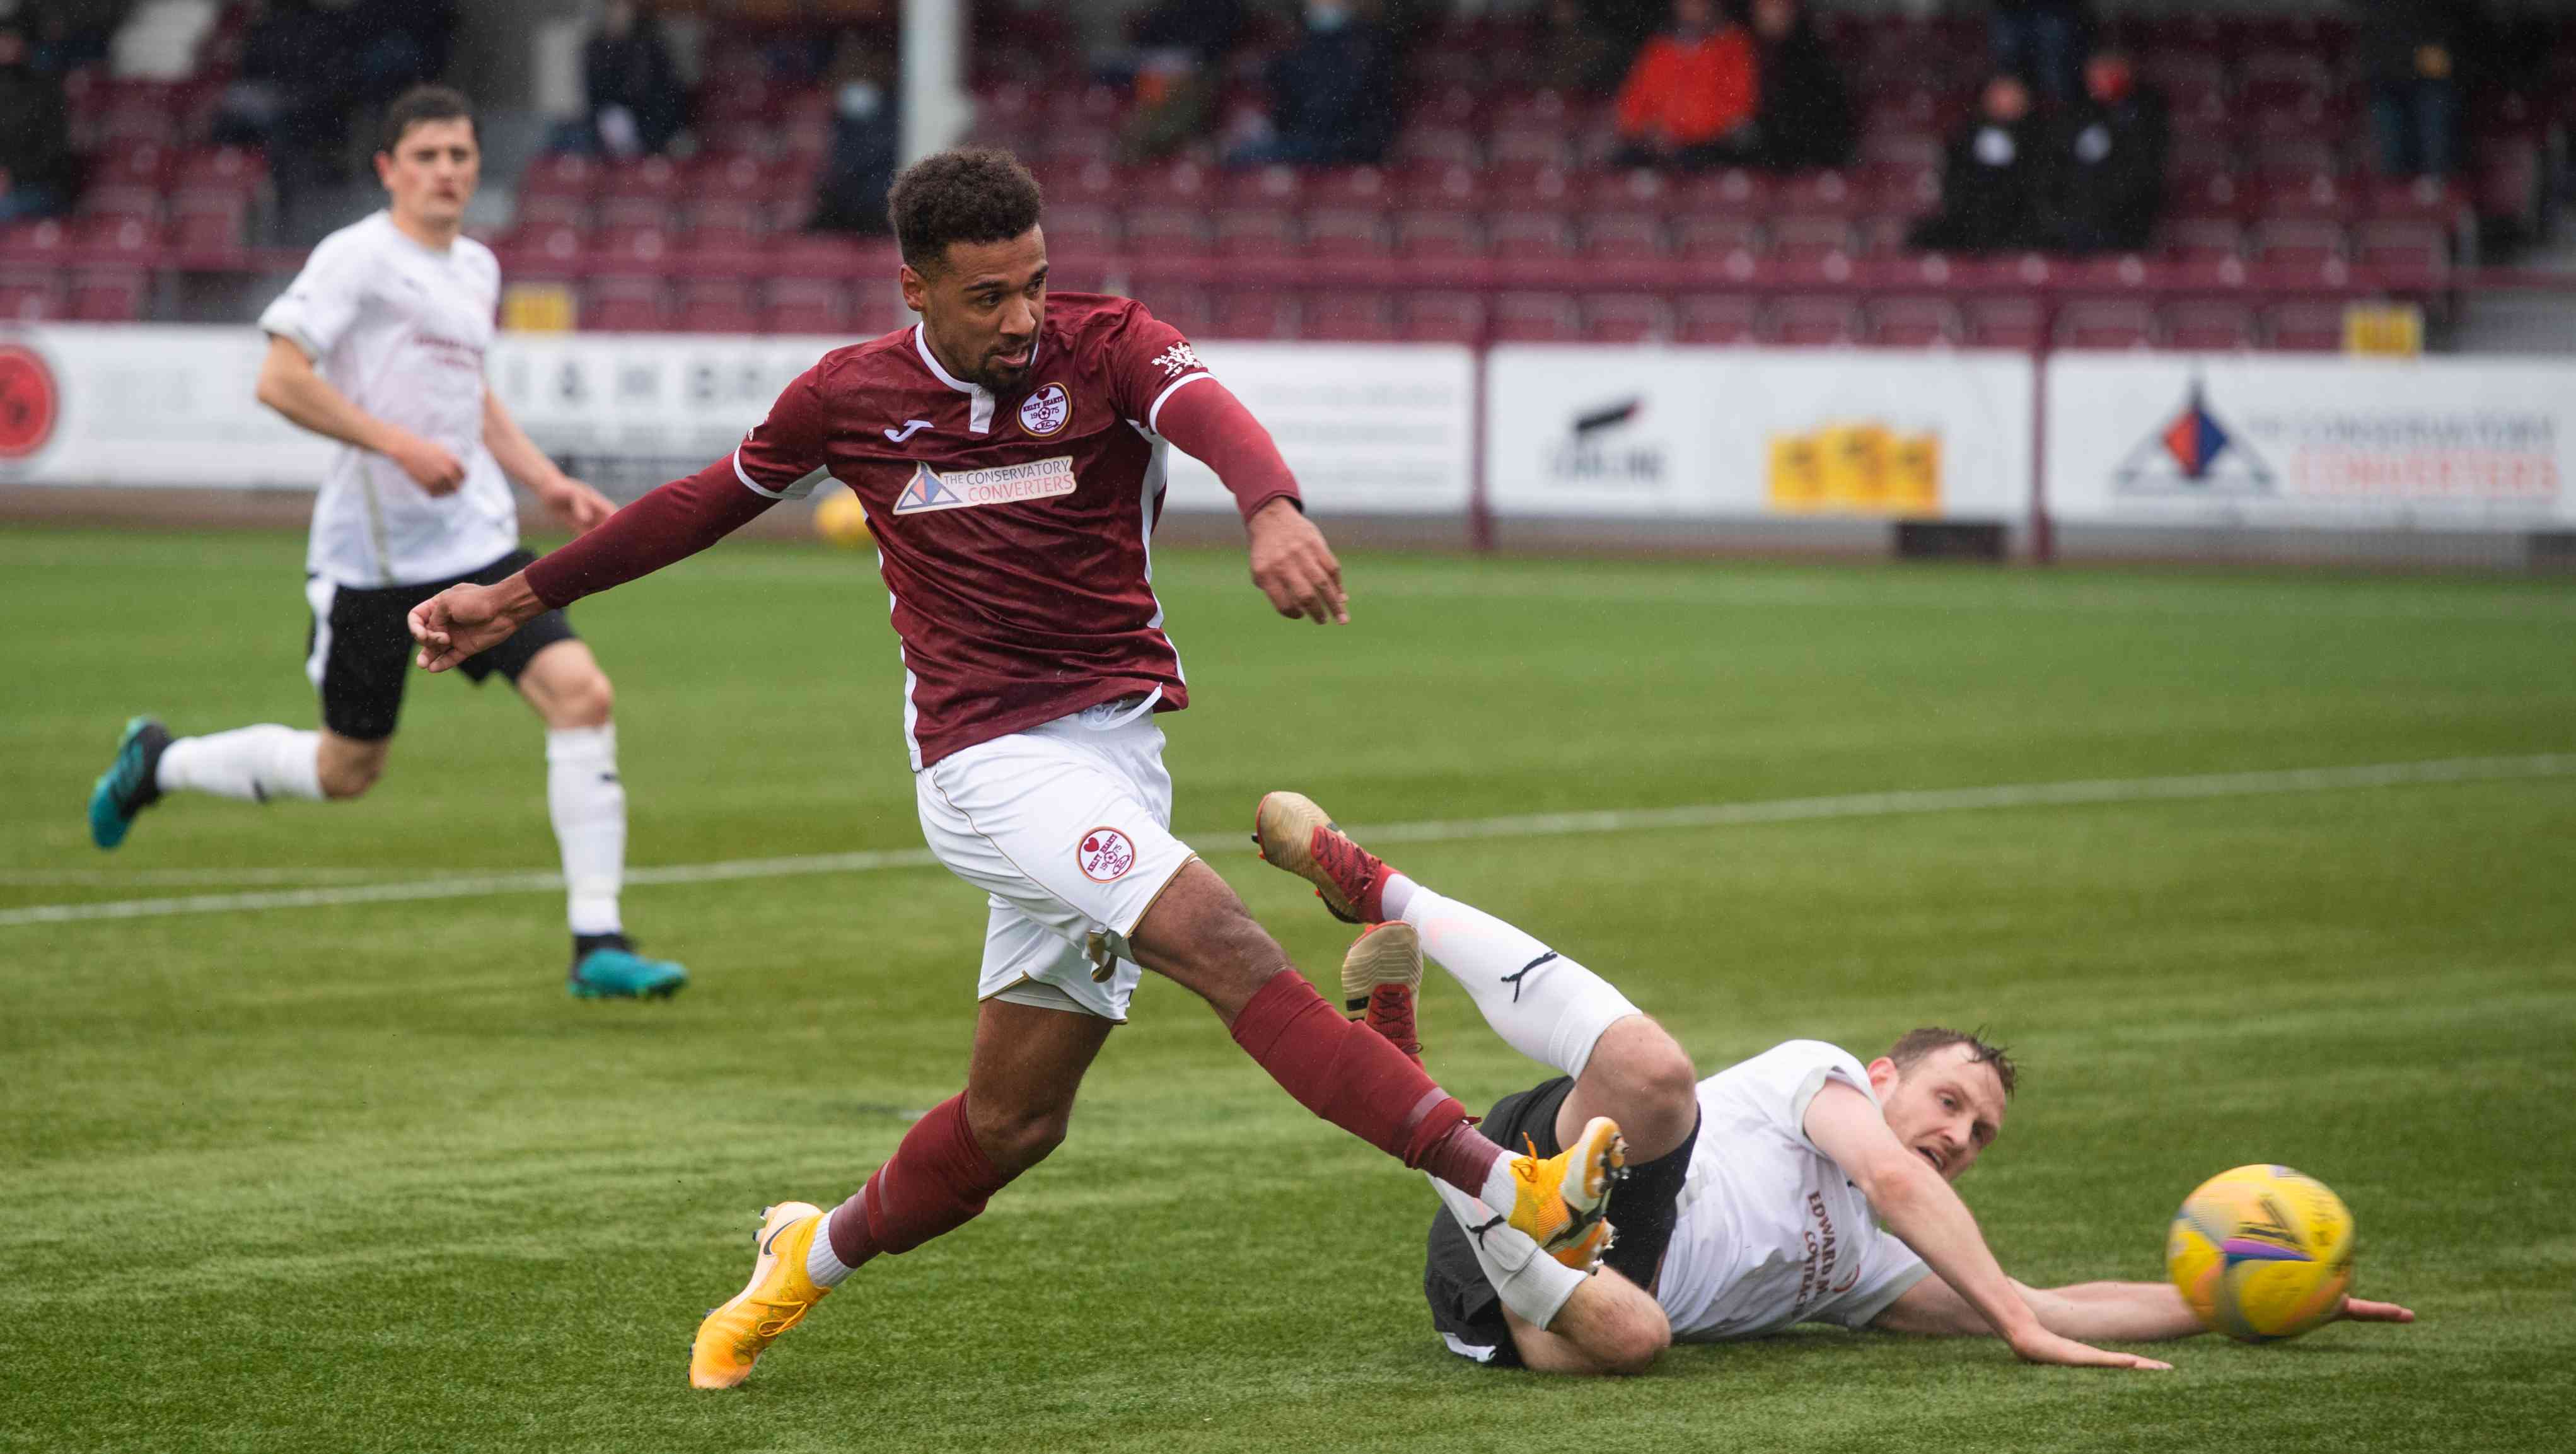 Kelty Hearts will kick off their first-ever SPFL season on Friday night.